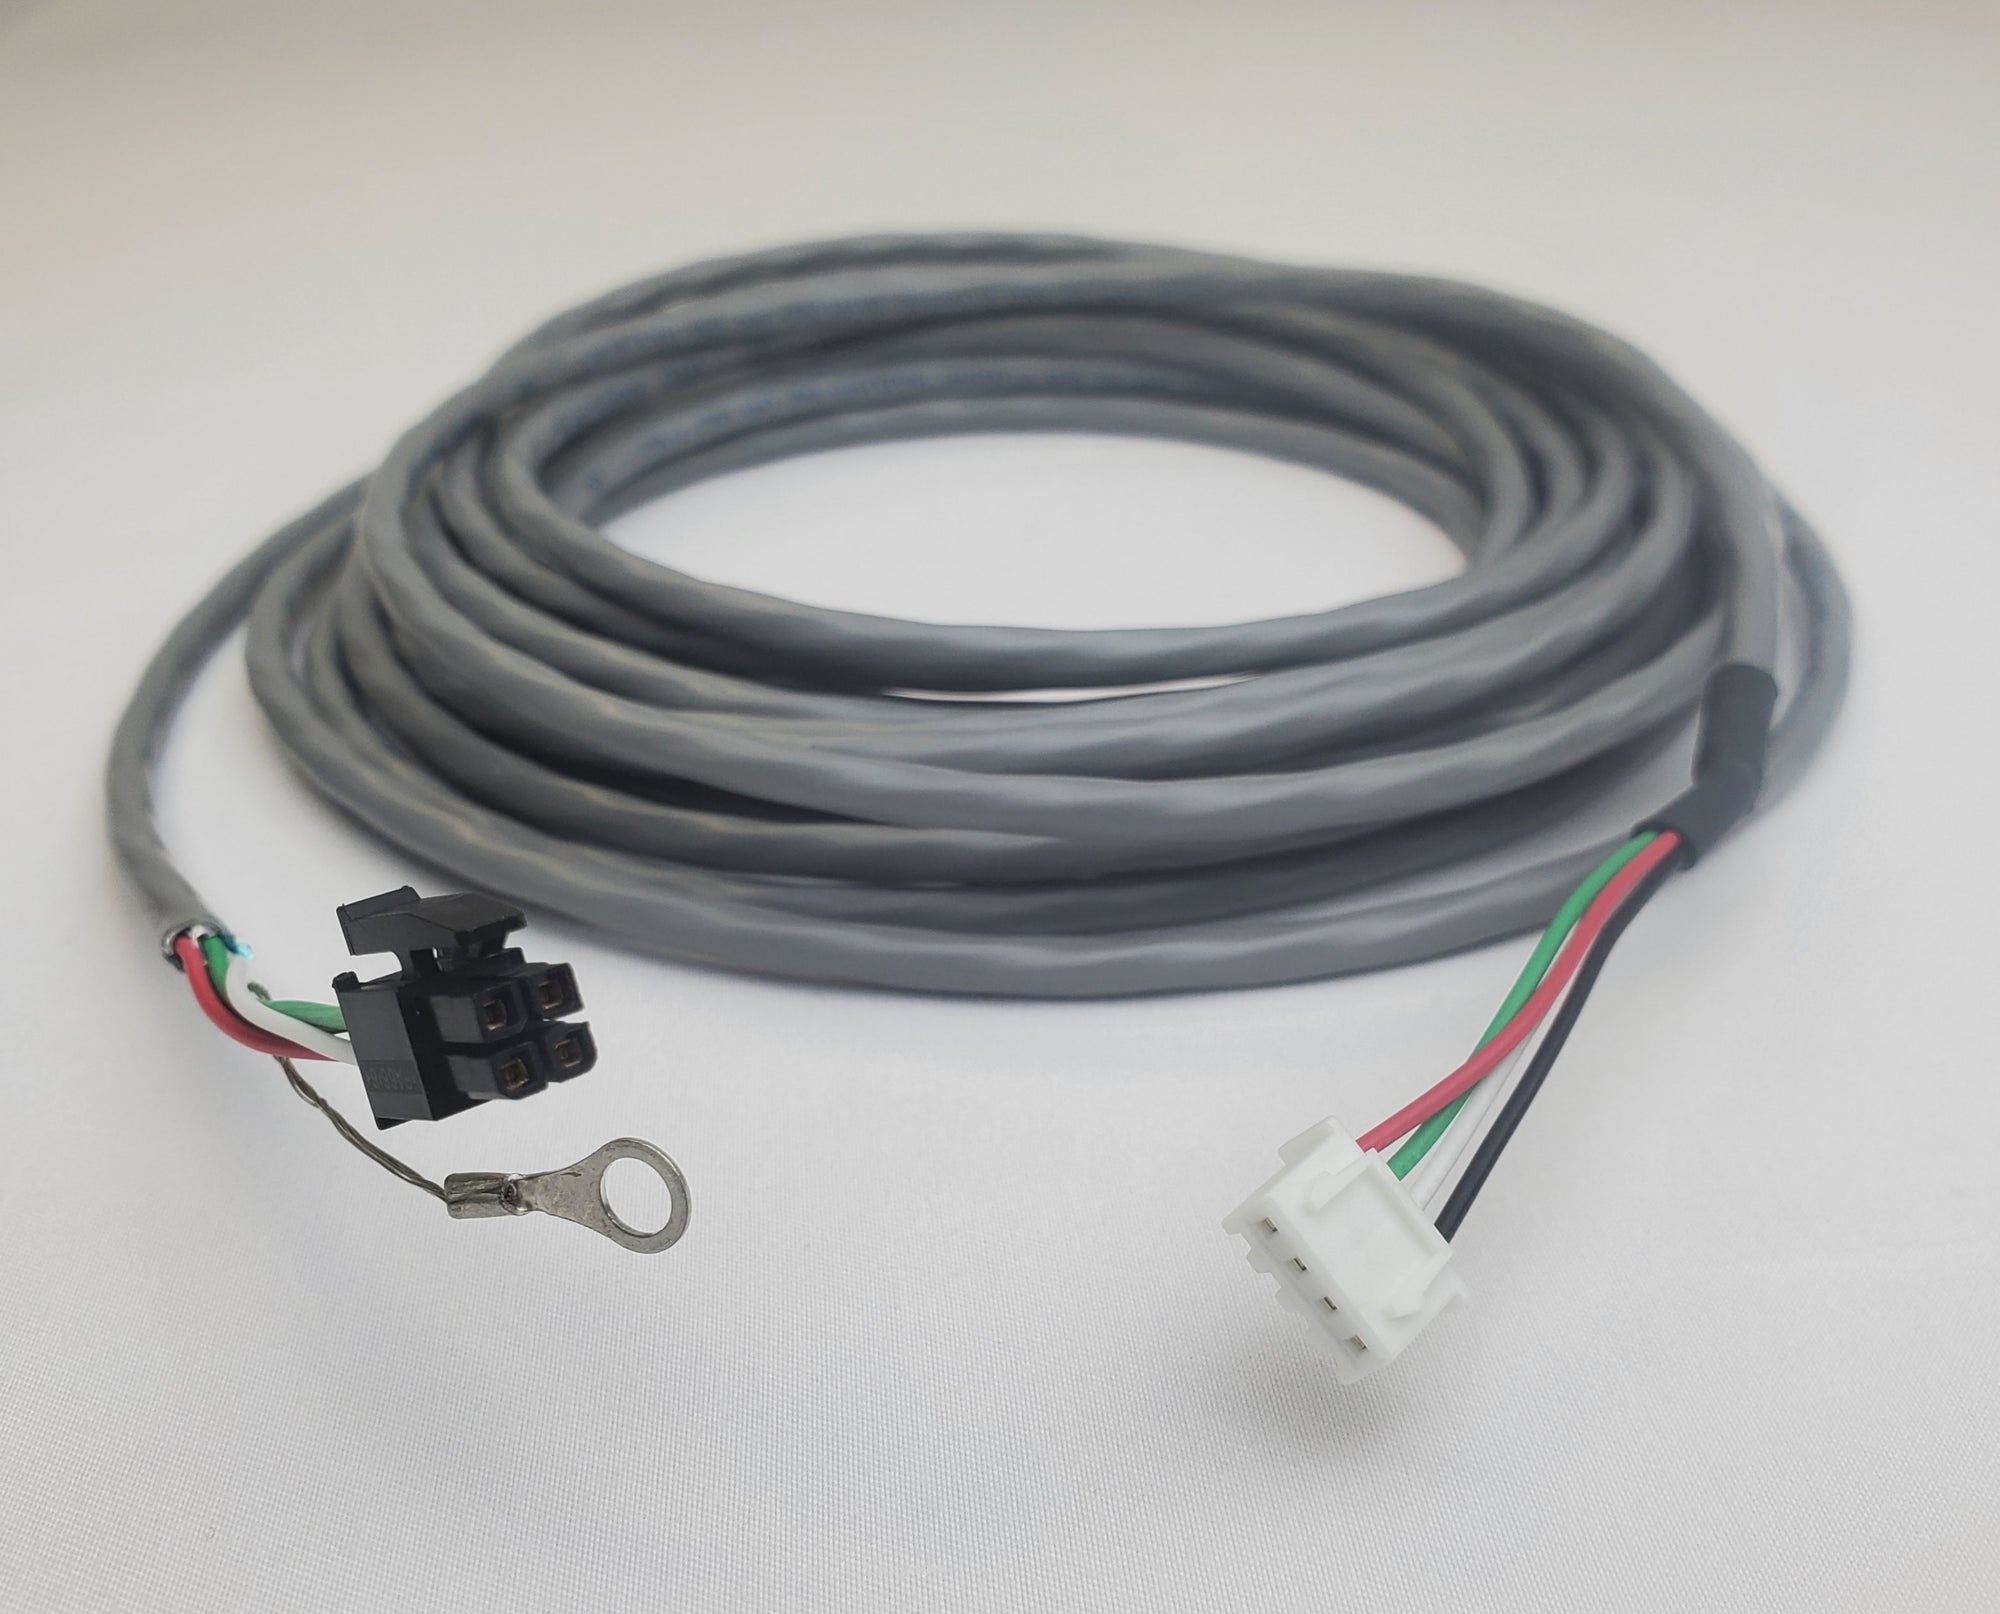 Elkay 1000004711 | 18' NSF wiring harness for remote filter application